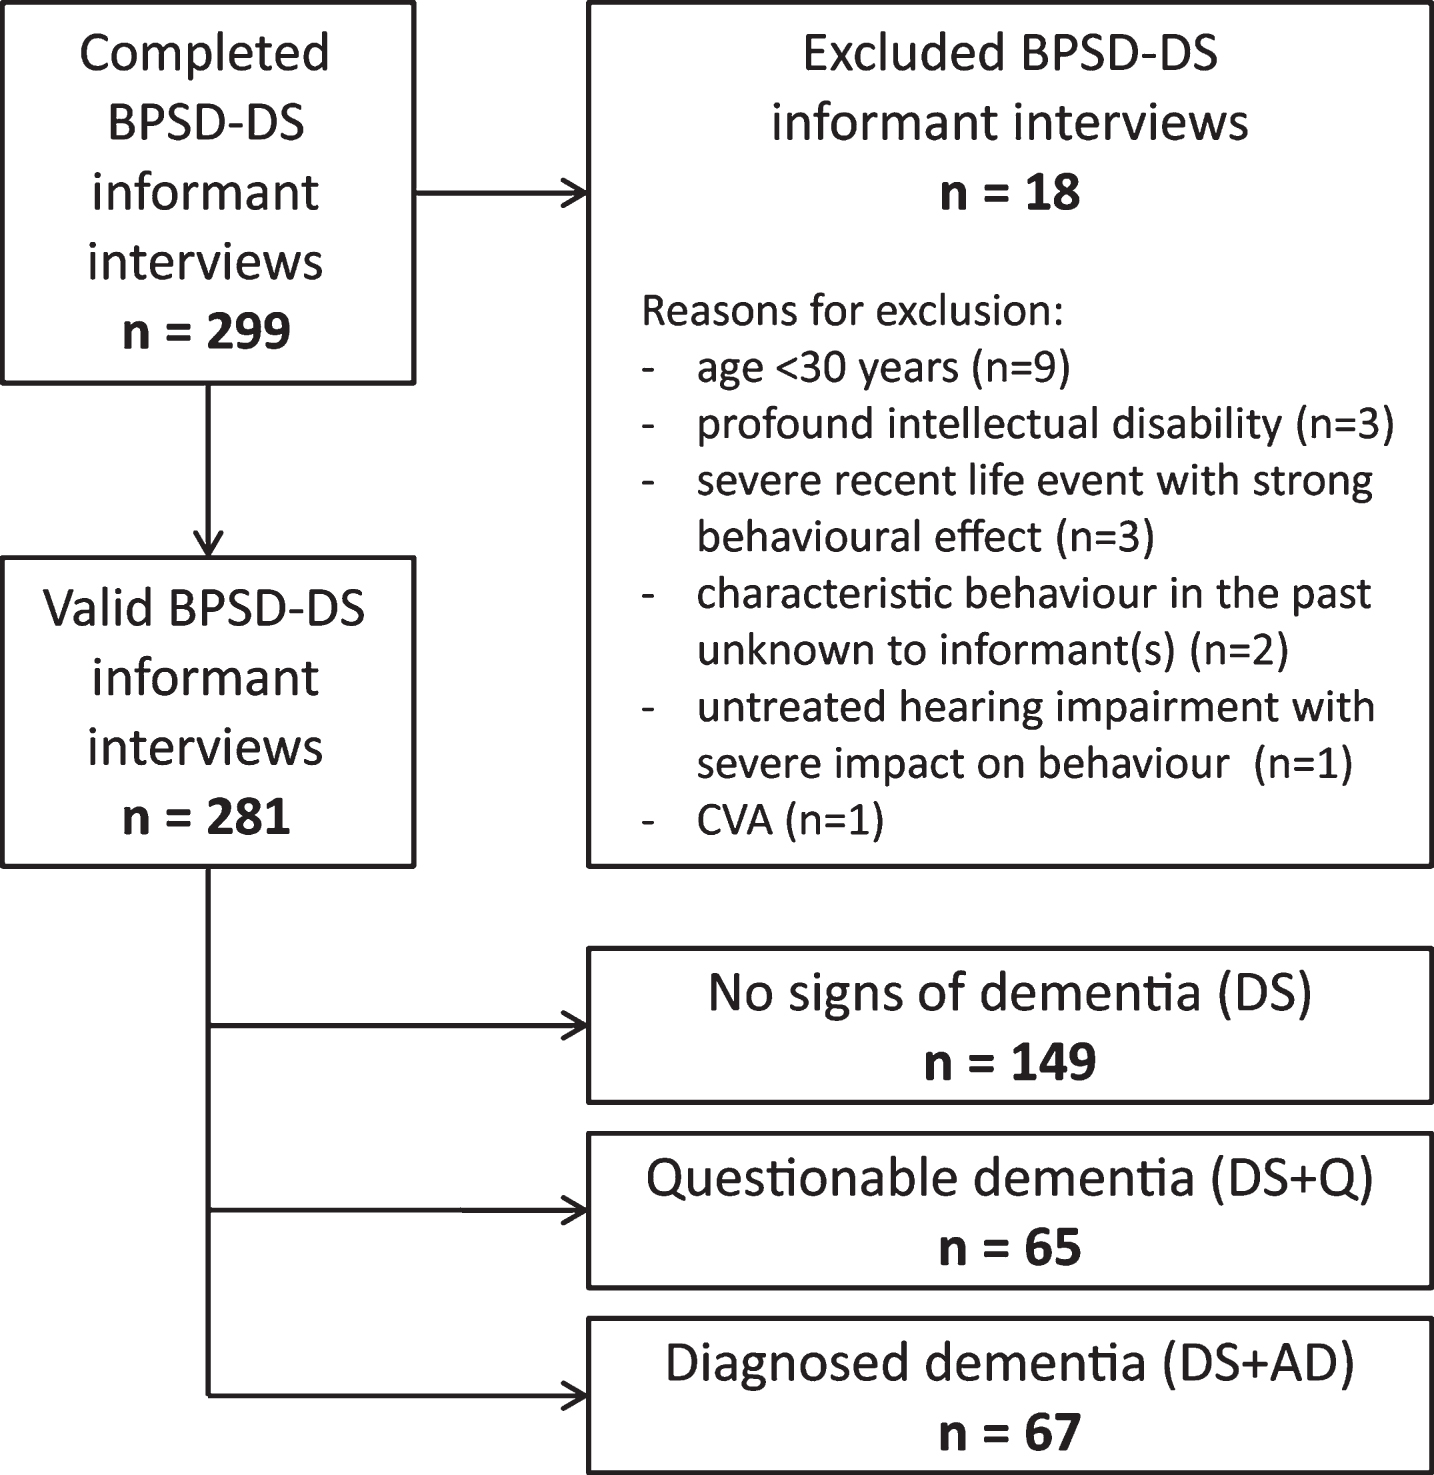 Schematic overview of included and excluded BPSD-DS informant interviews, subdivided in the three diagnostic groups. BPSD-DS, Behavioral and Psychological Symptoms of Dementia in Down Syndrome scale; CVA, cerebrovascular accident.